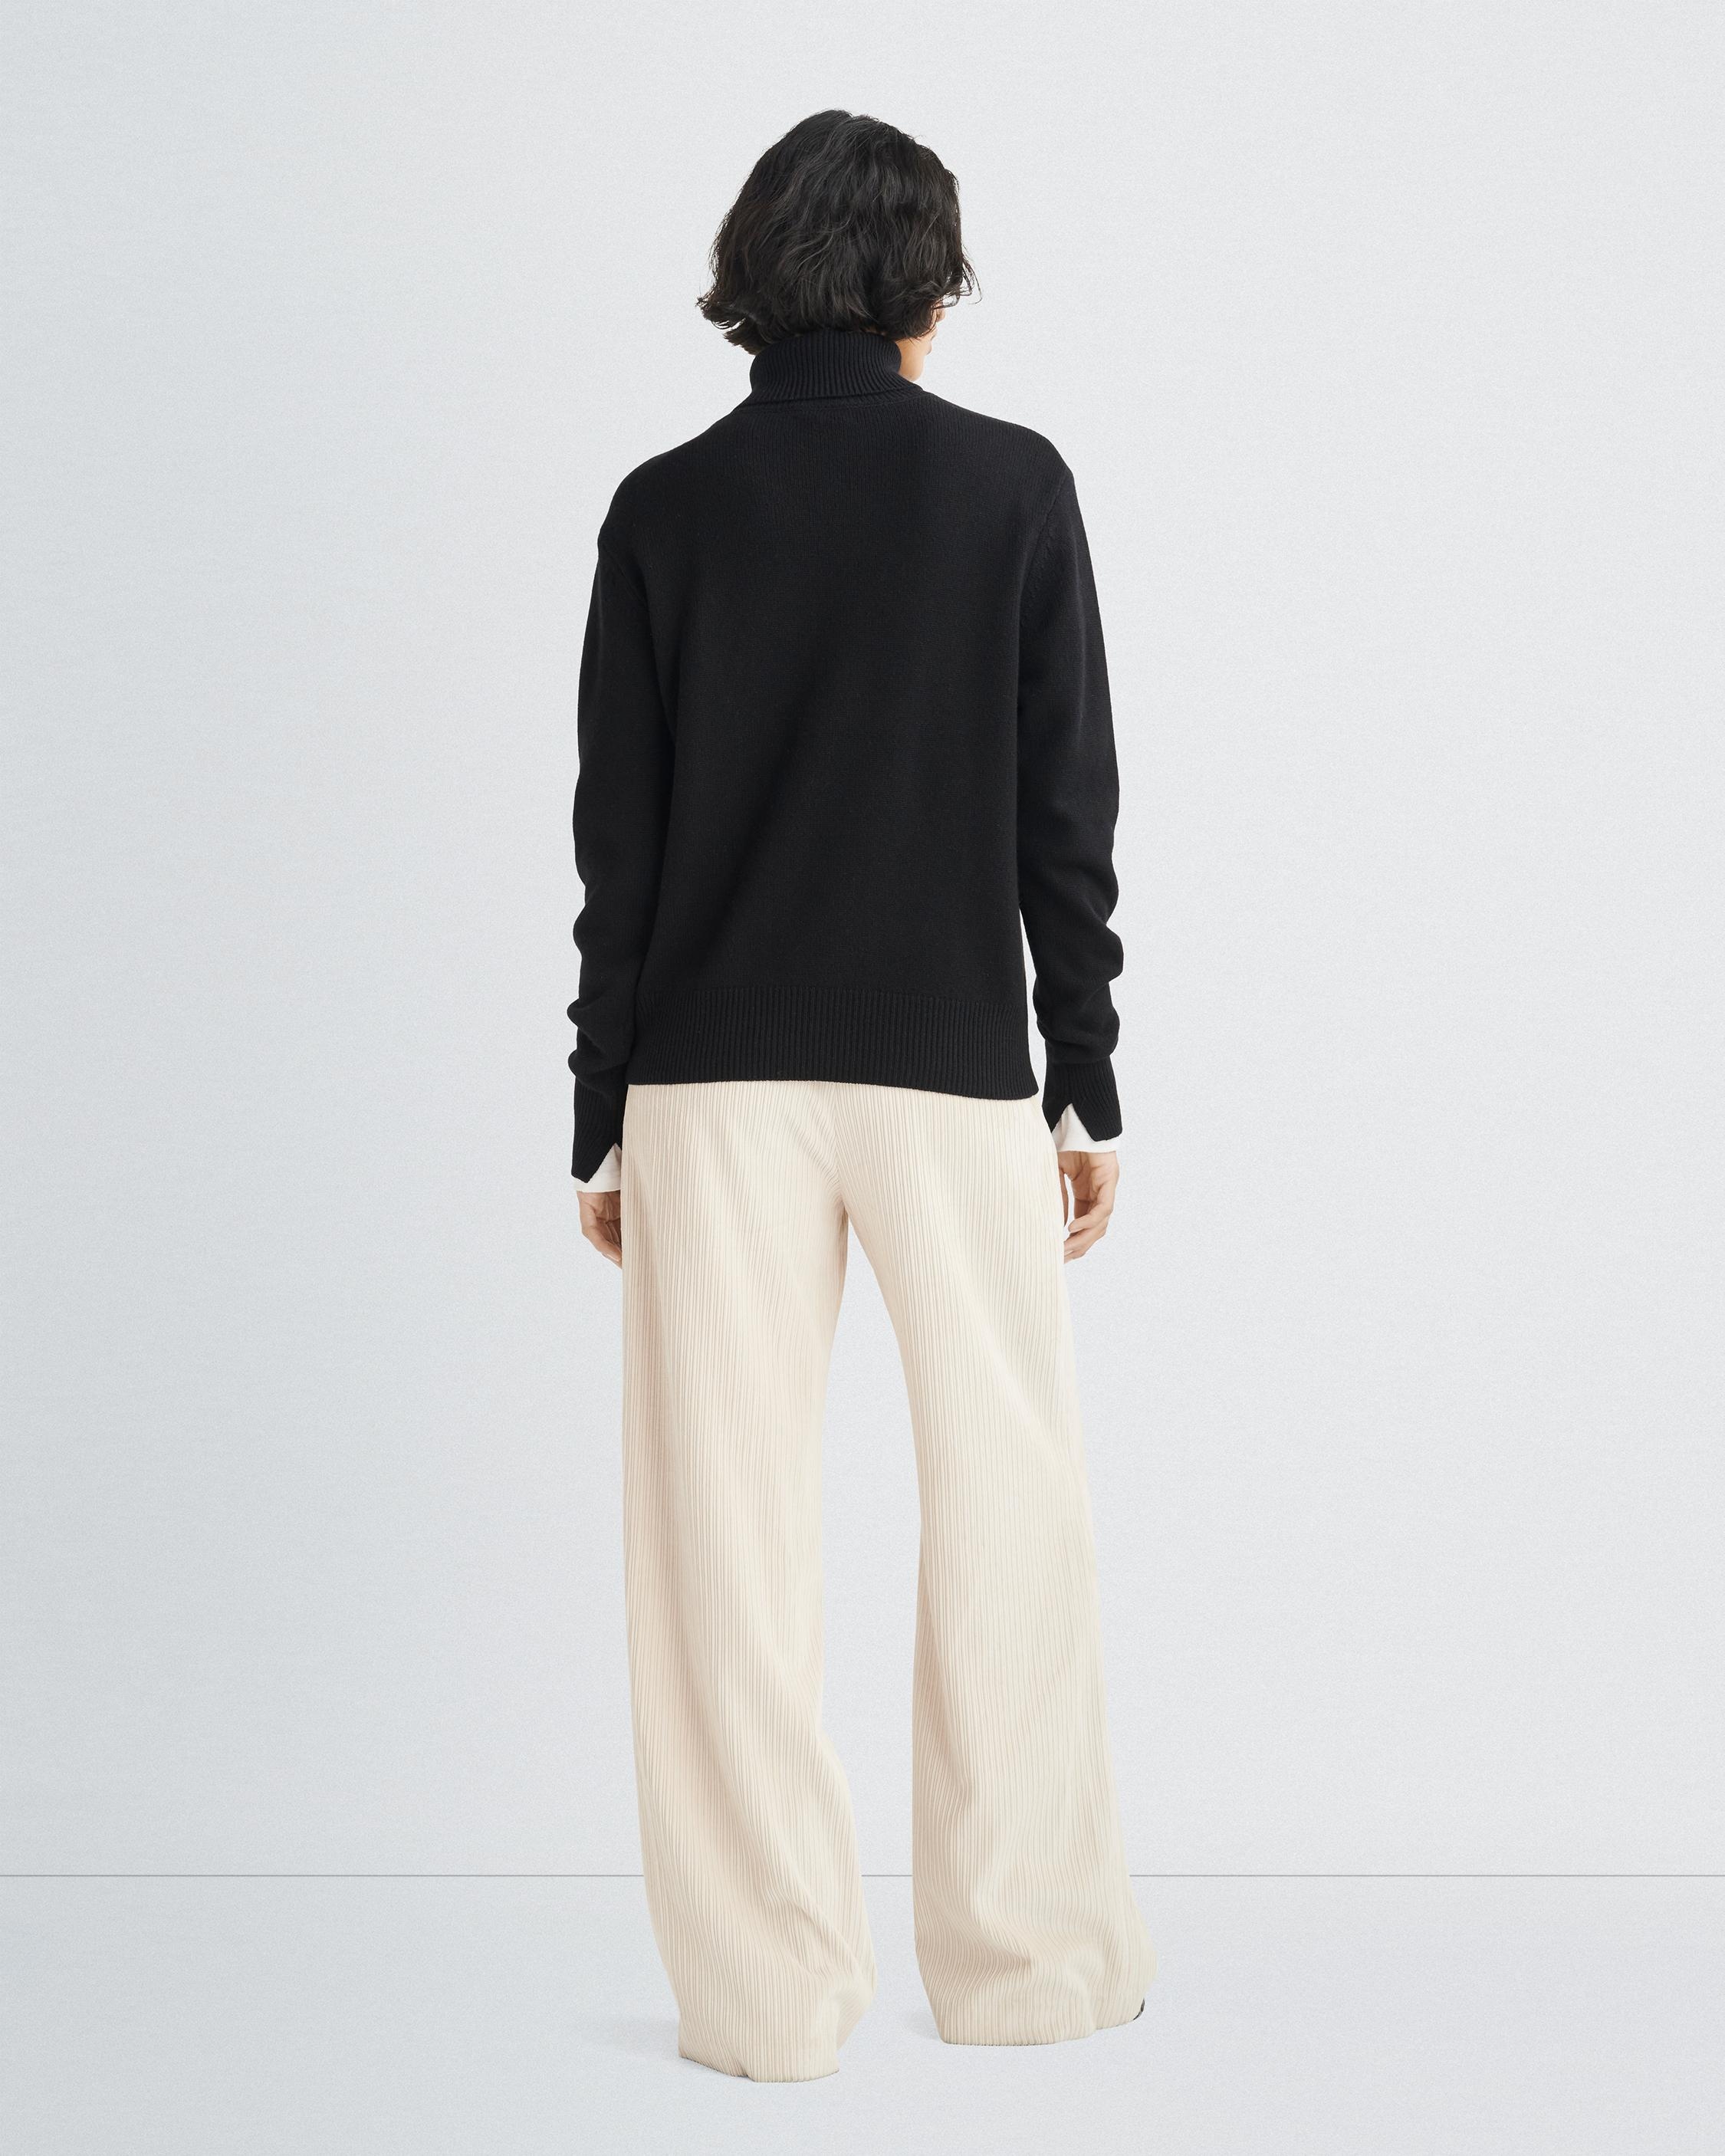 Talan Cashmere Turtleneck
Relaxed Fit - 5